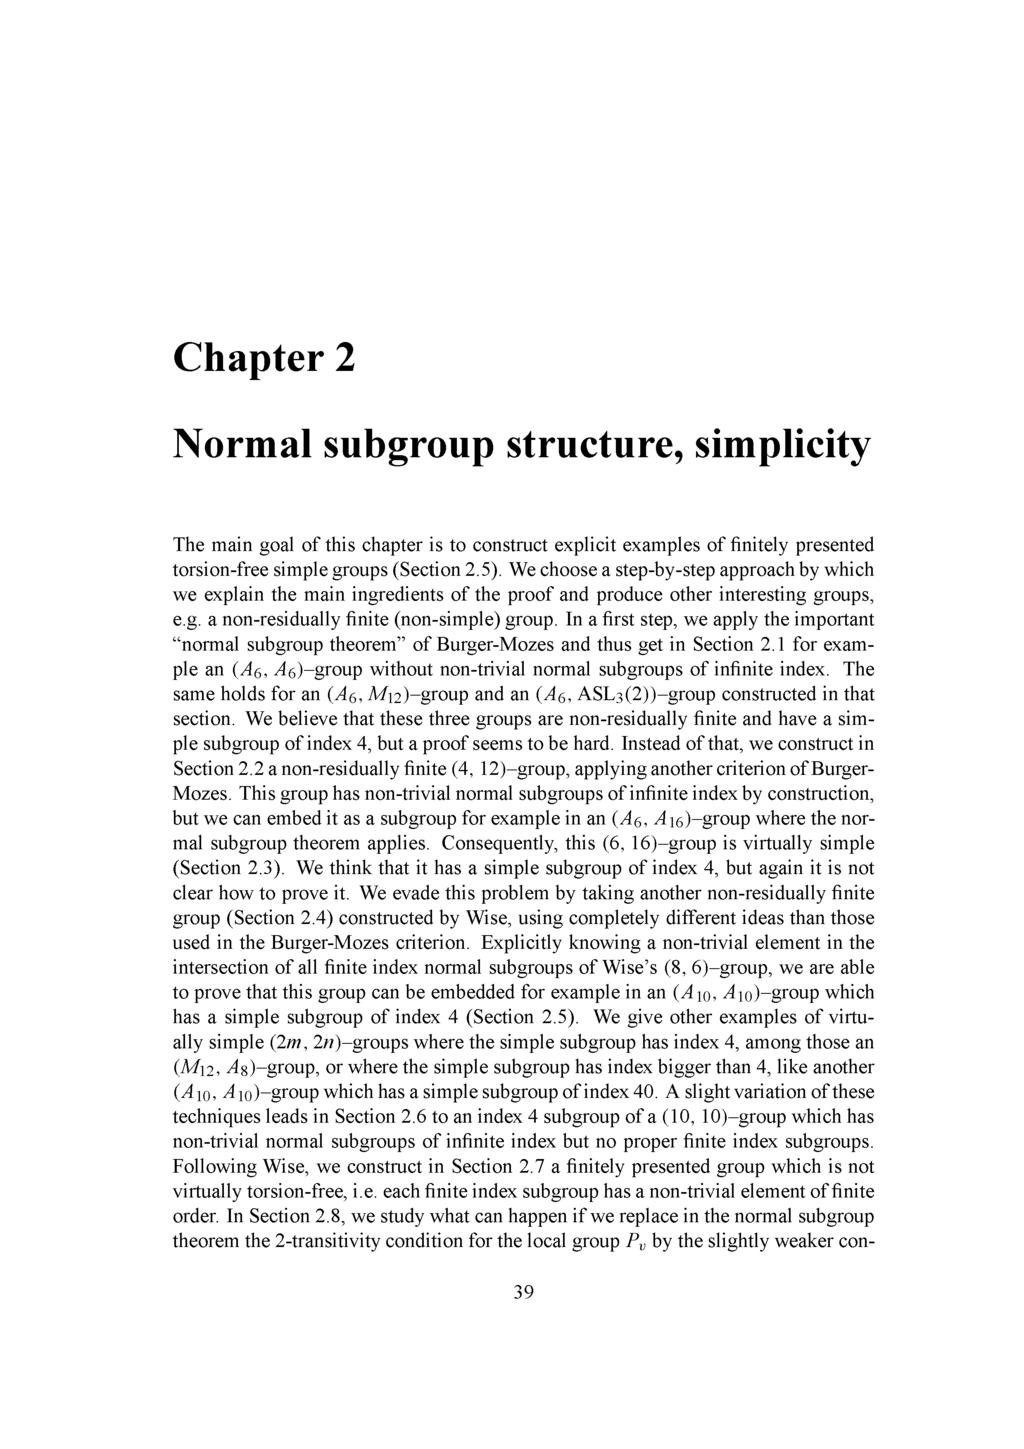 Chapter 2 Normal subgroup structure, simplicity The main goal of this chapter is to construct explicit examples of finitely presented torsionfree simple groups (Section 2.5).